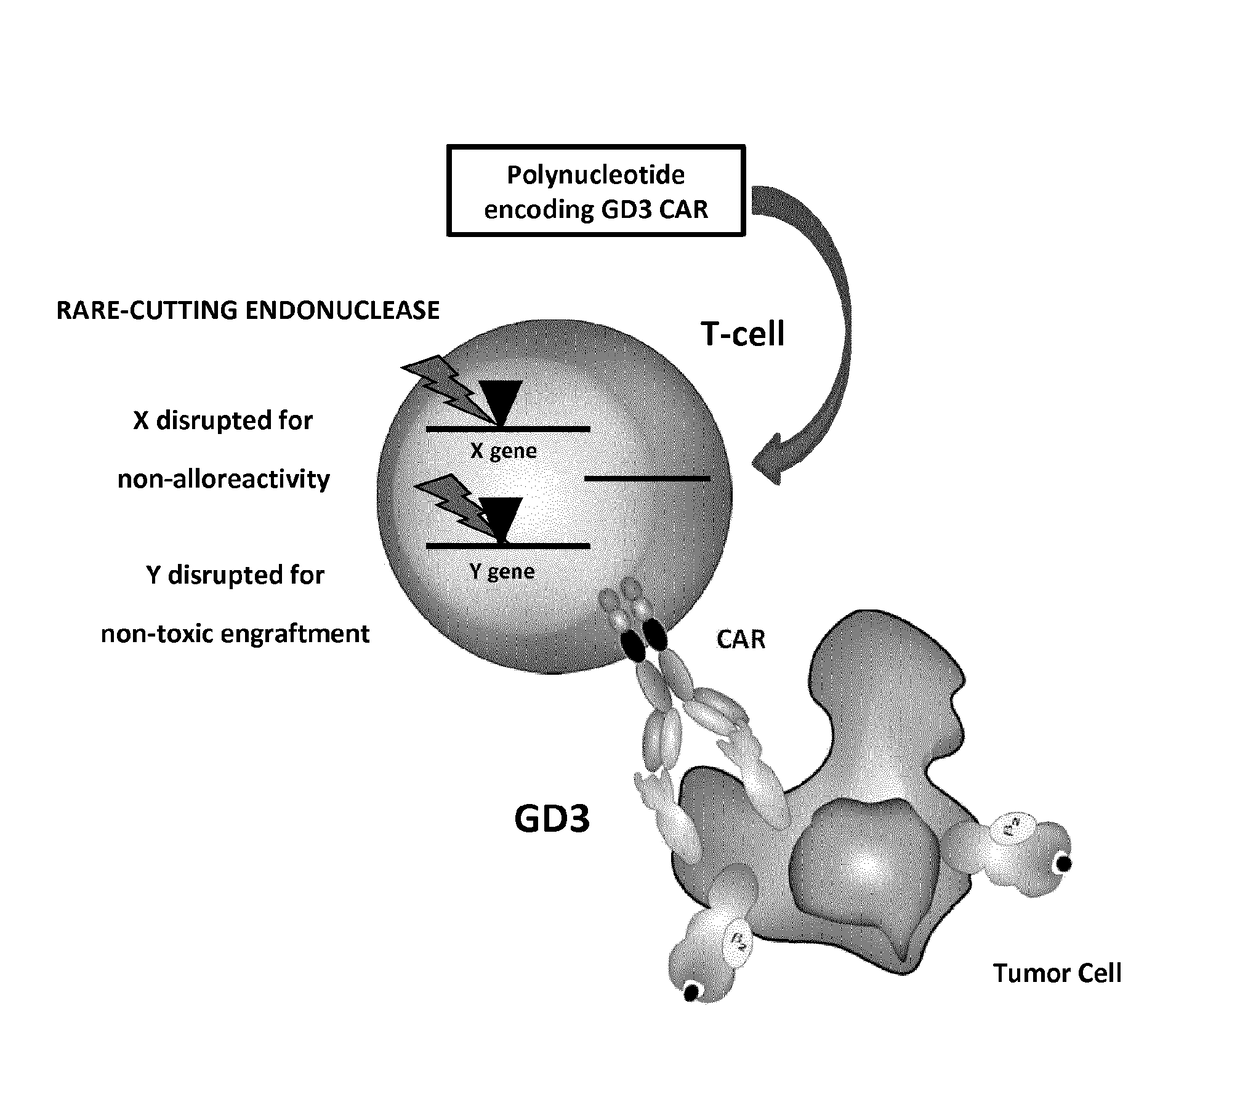 Anti-gd3 specific chimeric antigen receptors for cancer immunotherapy